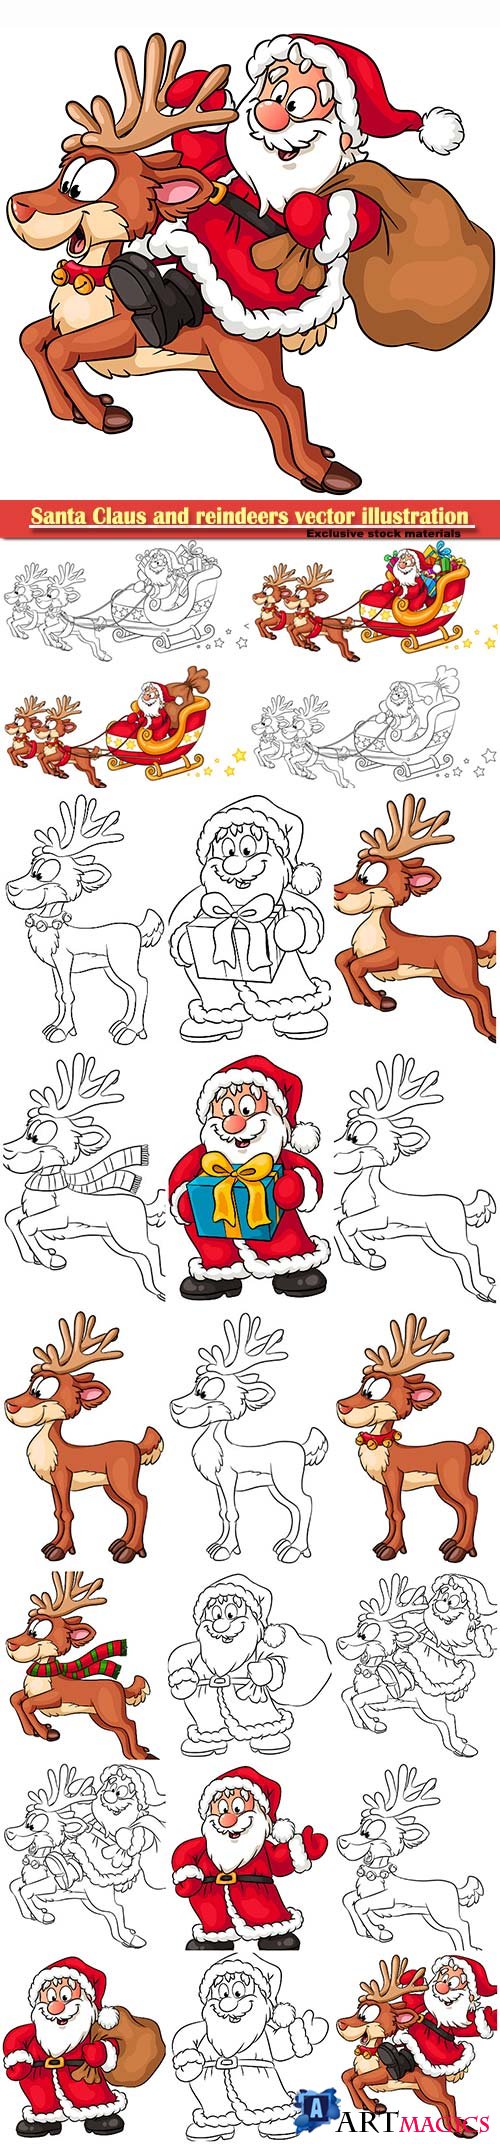 Santa Claus and reindeers vector illustration